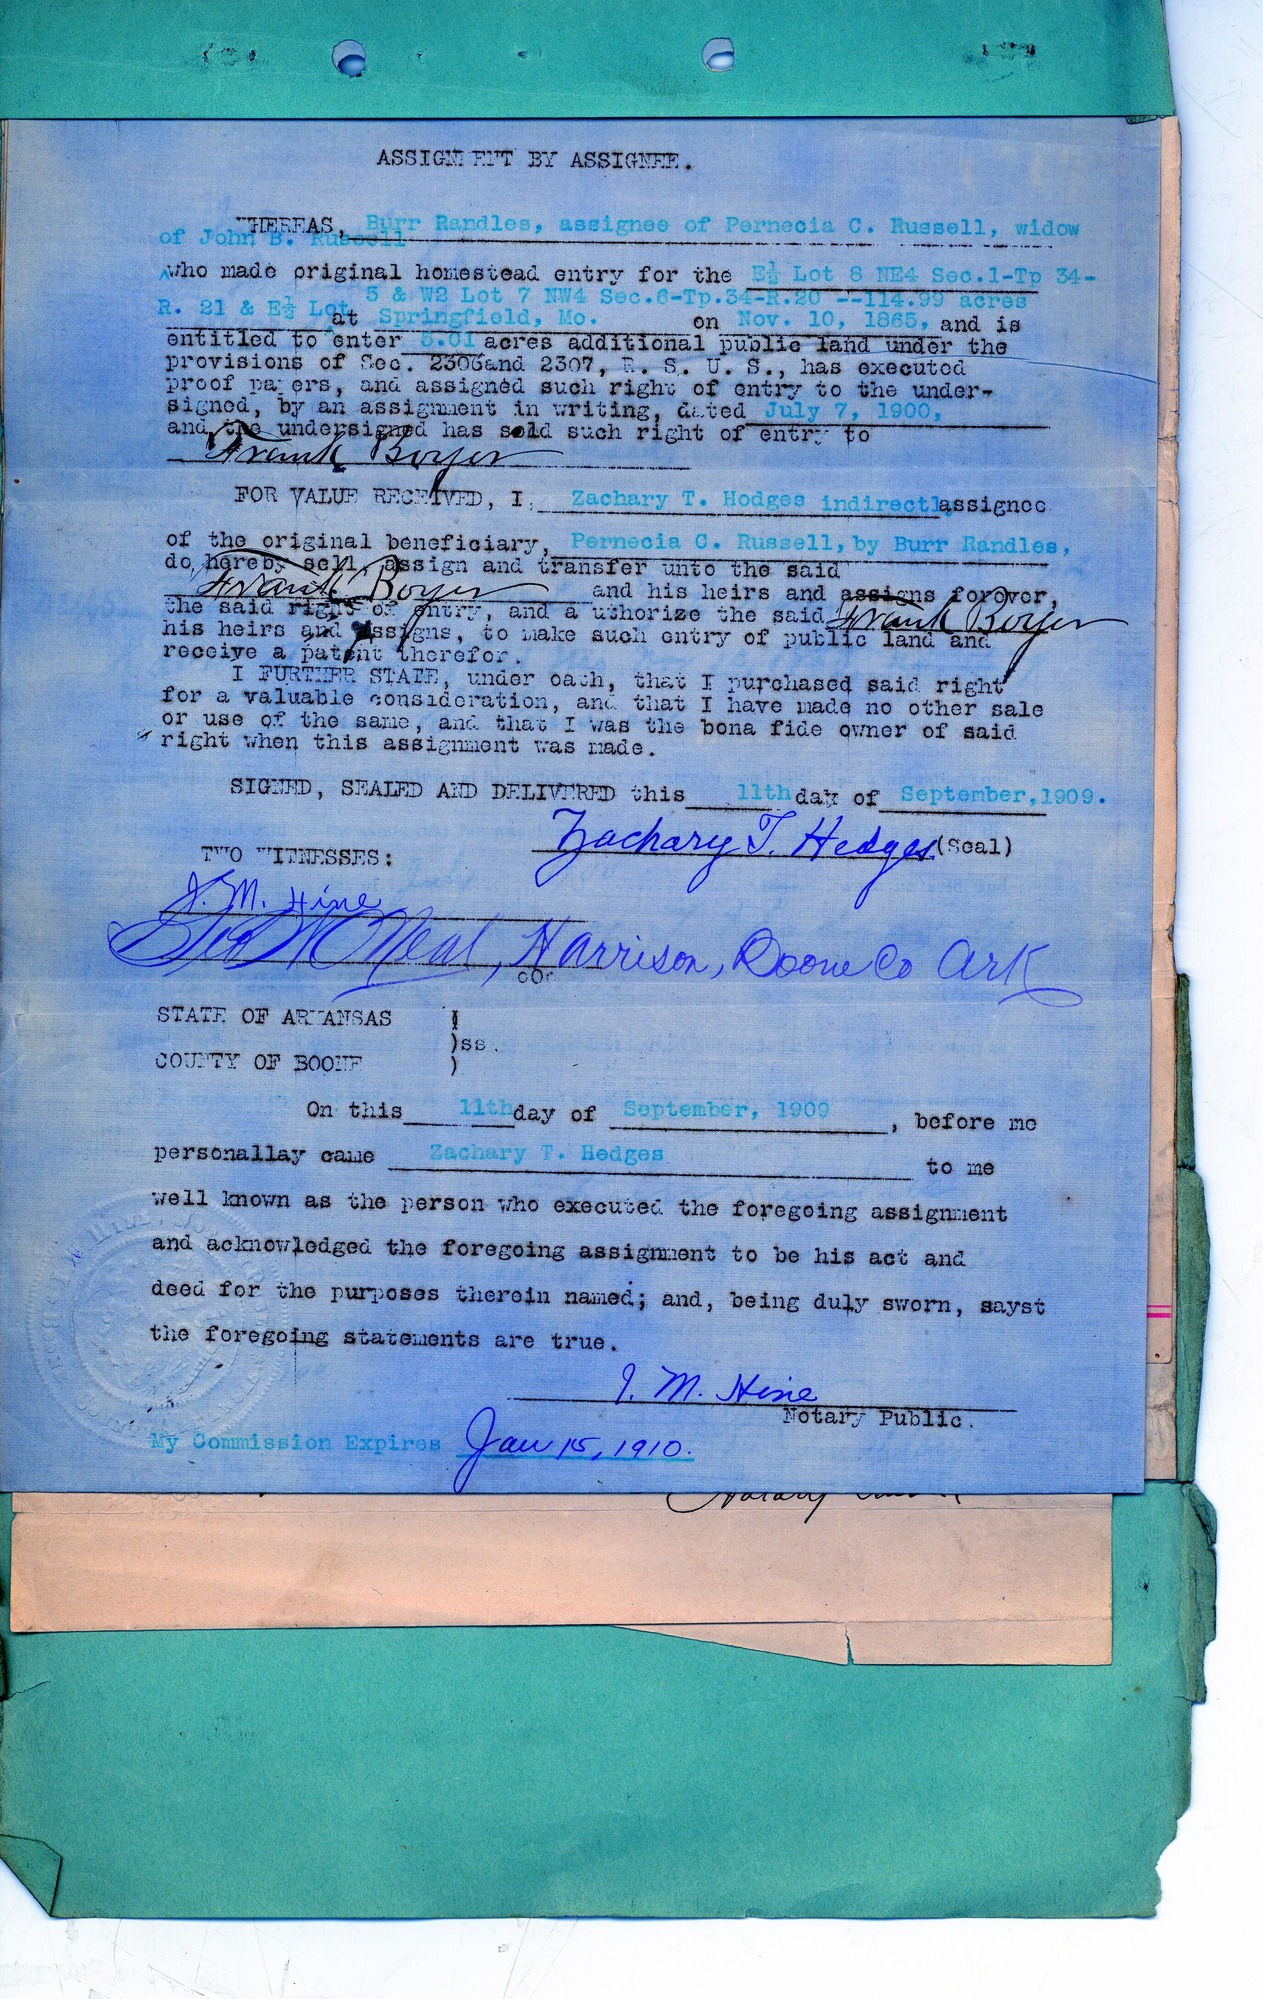 Scanned image of a land assignment form. See description for text.